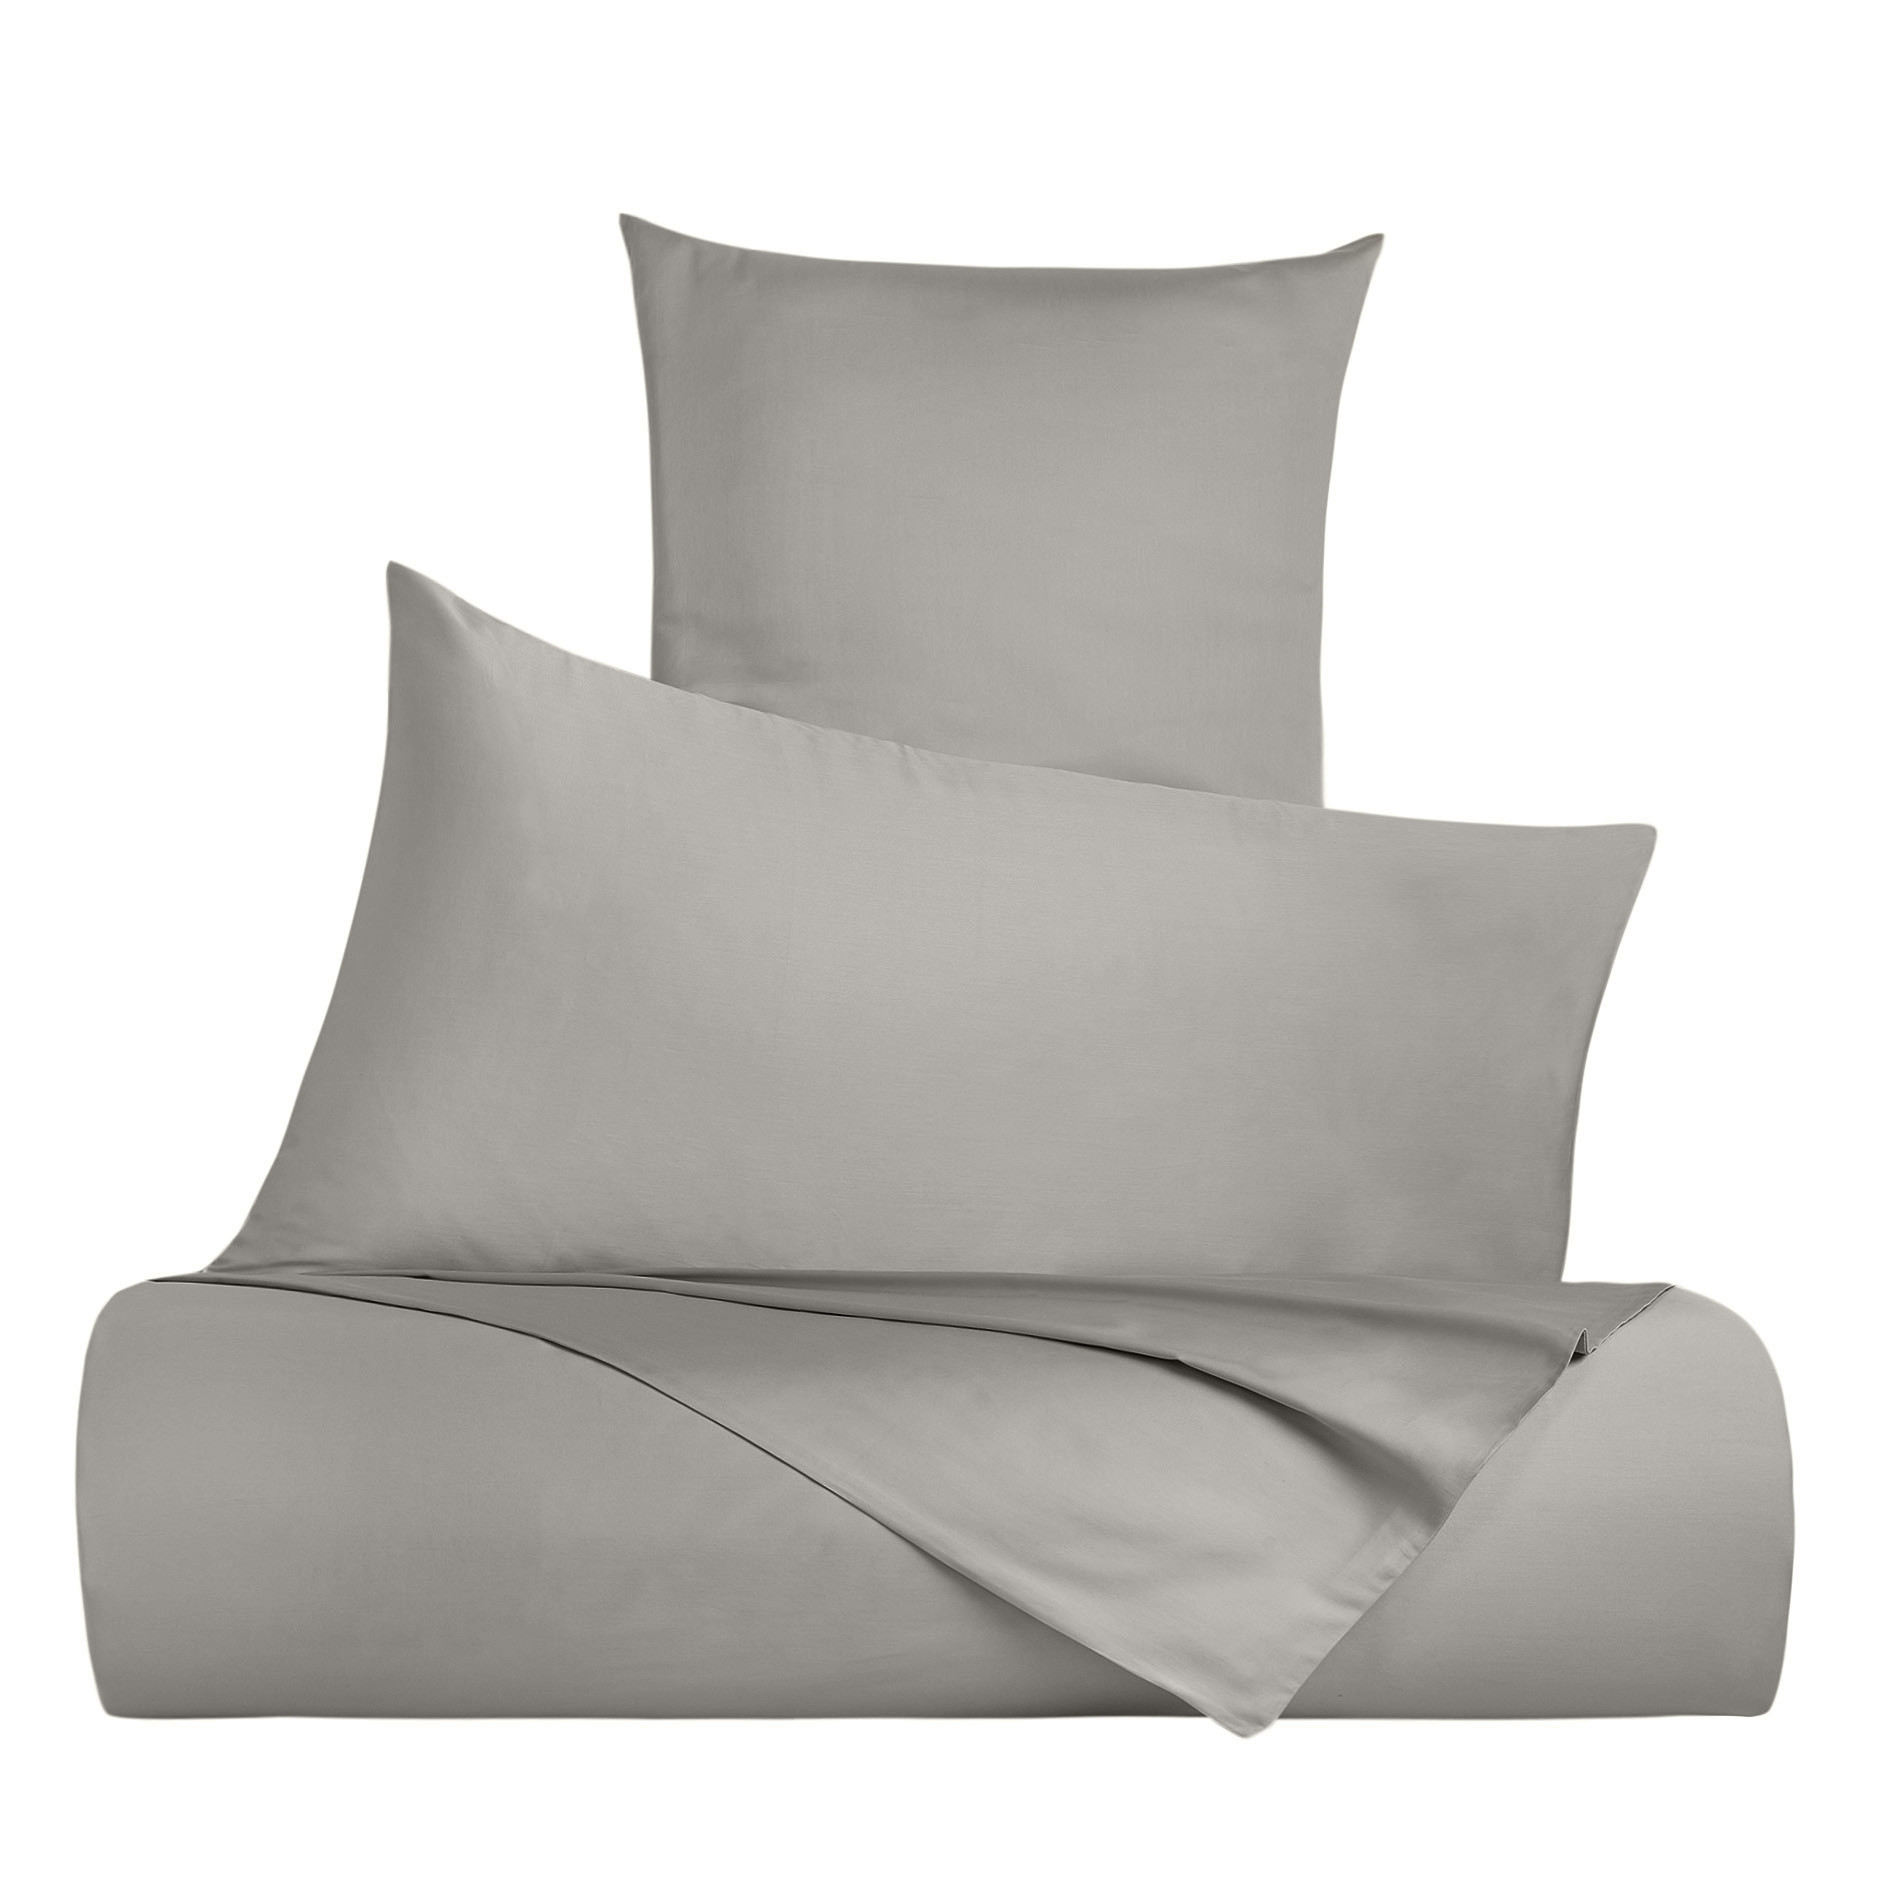 Zefiro bed linen set in 100% cotton satin, Grey, large image number 0